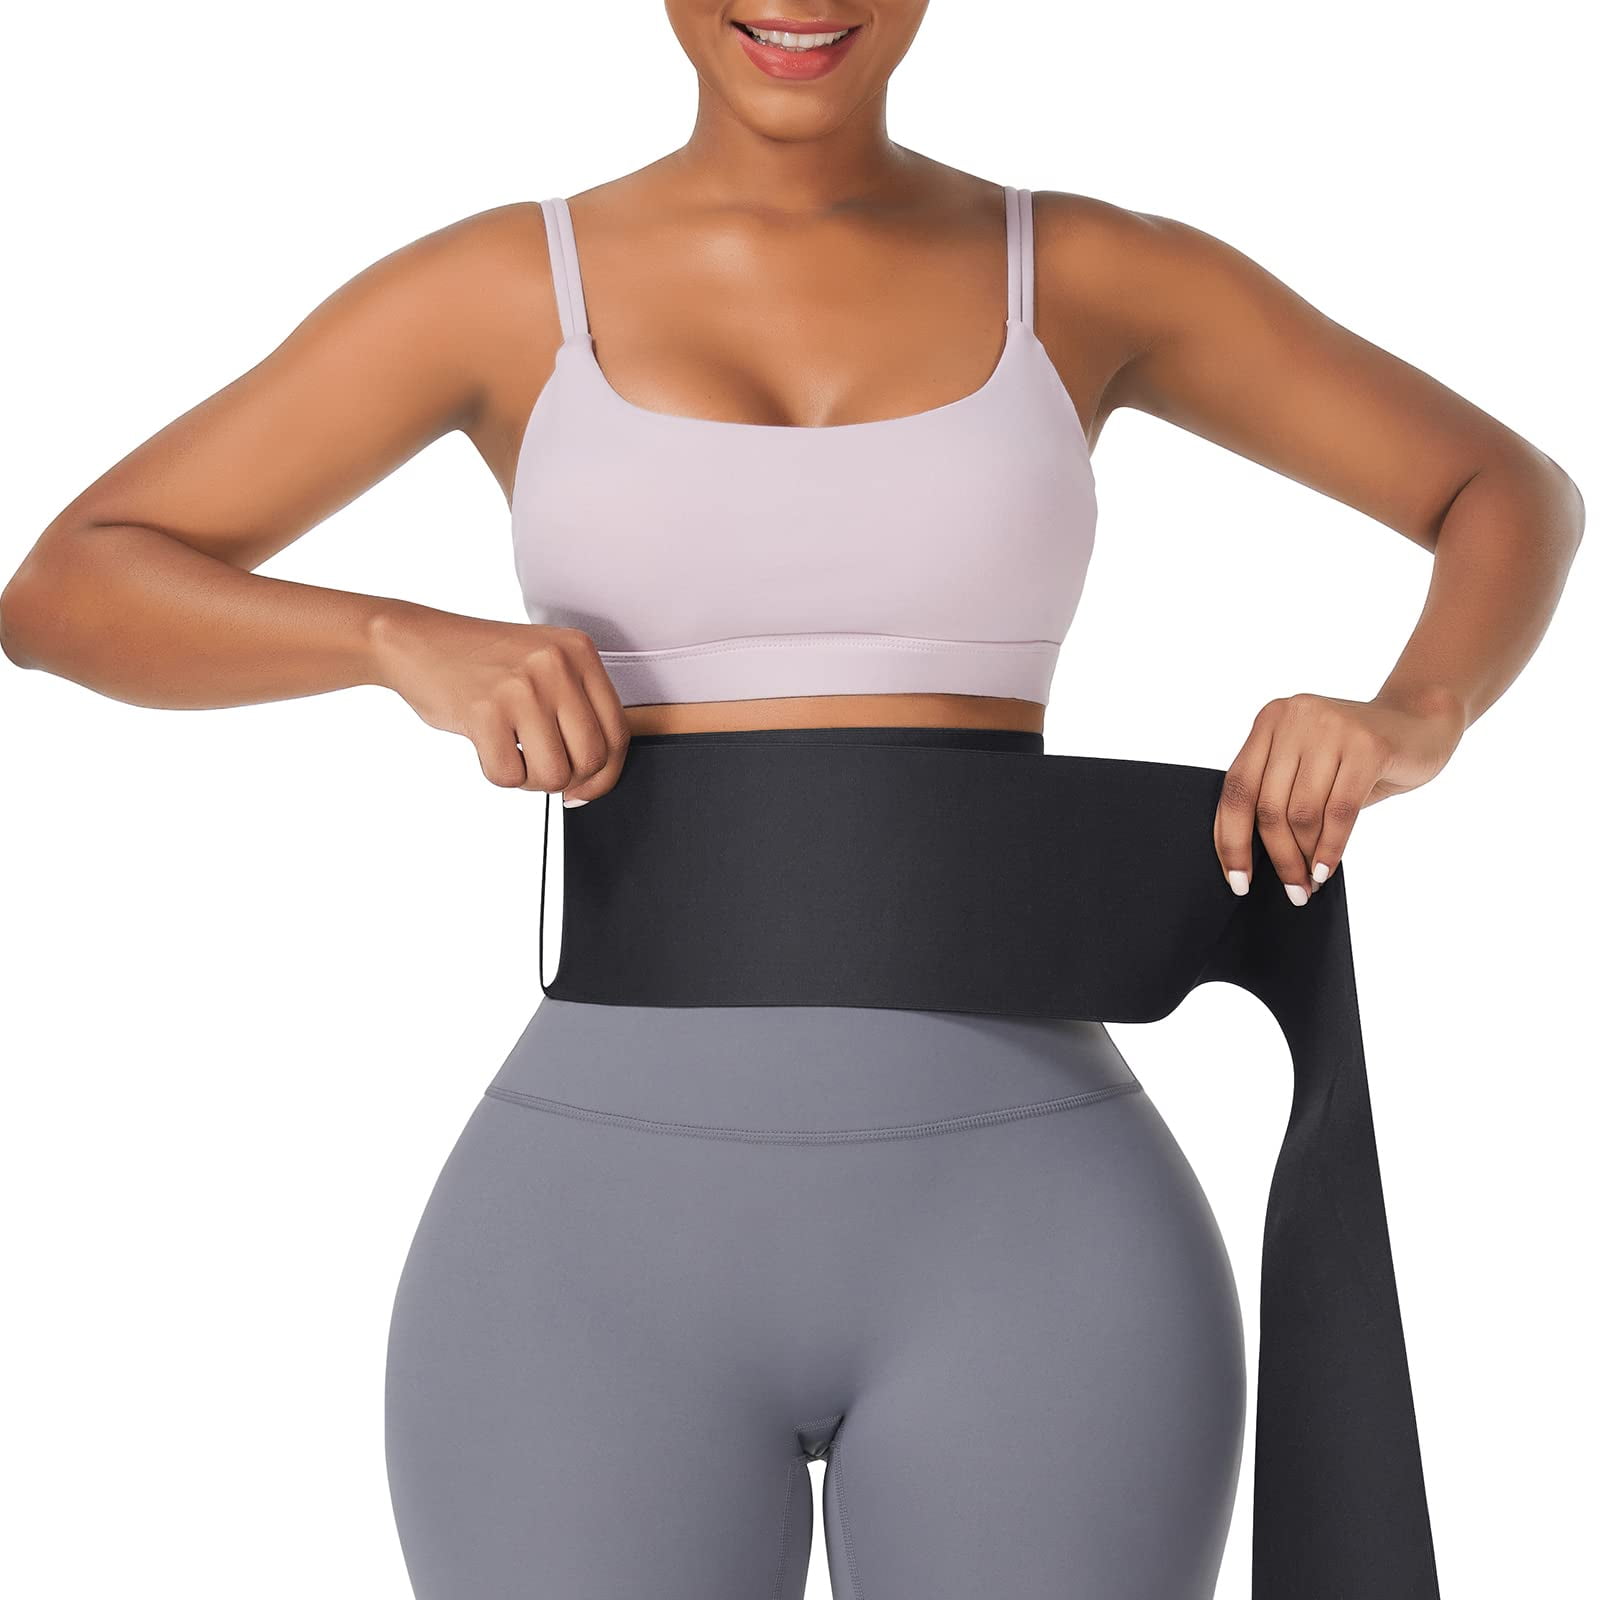 Adjustable Workout Waist Wraps for stomach/Belly/Tummy Trimmer Belt with Loop for Gym Sport Black Snatch Me Up Bandage Wrap Plus Size Waist Trainer for Women Lower Belly Fat 